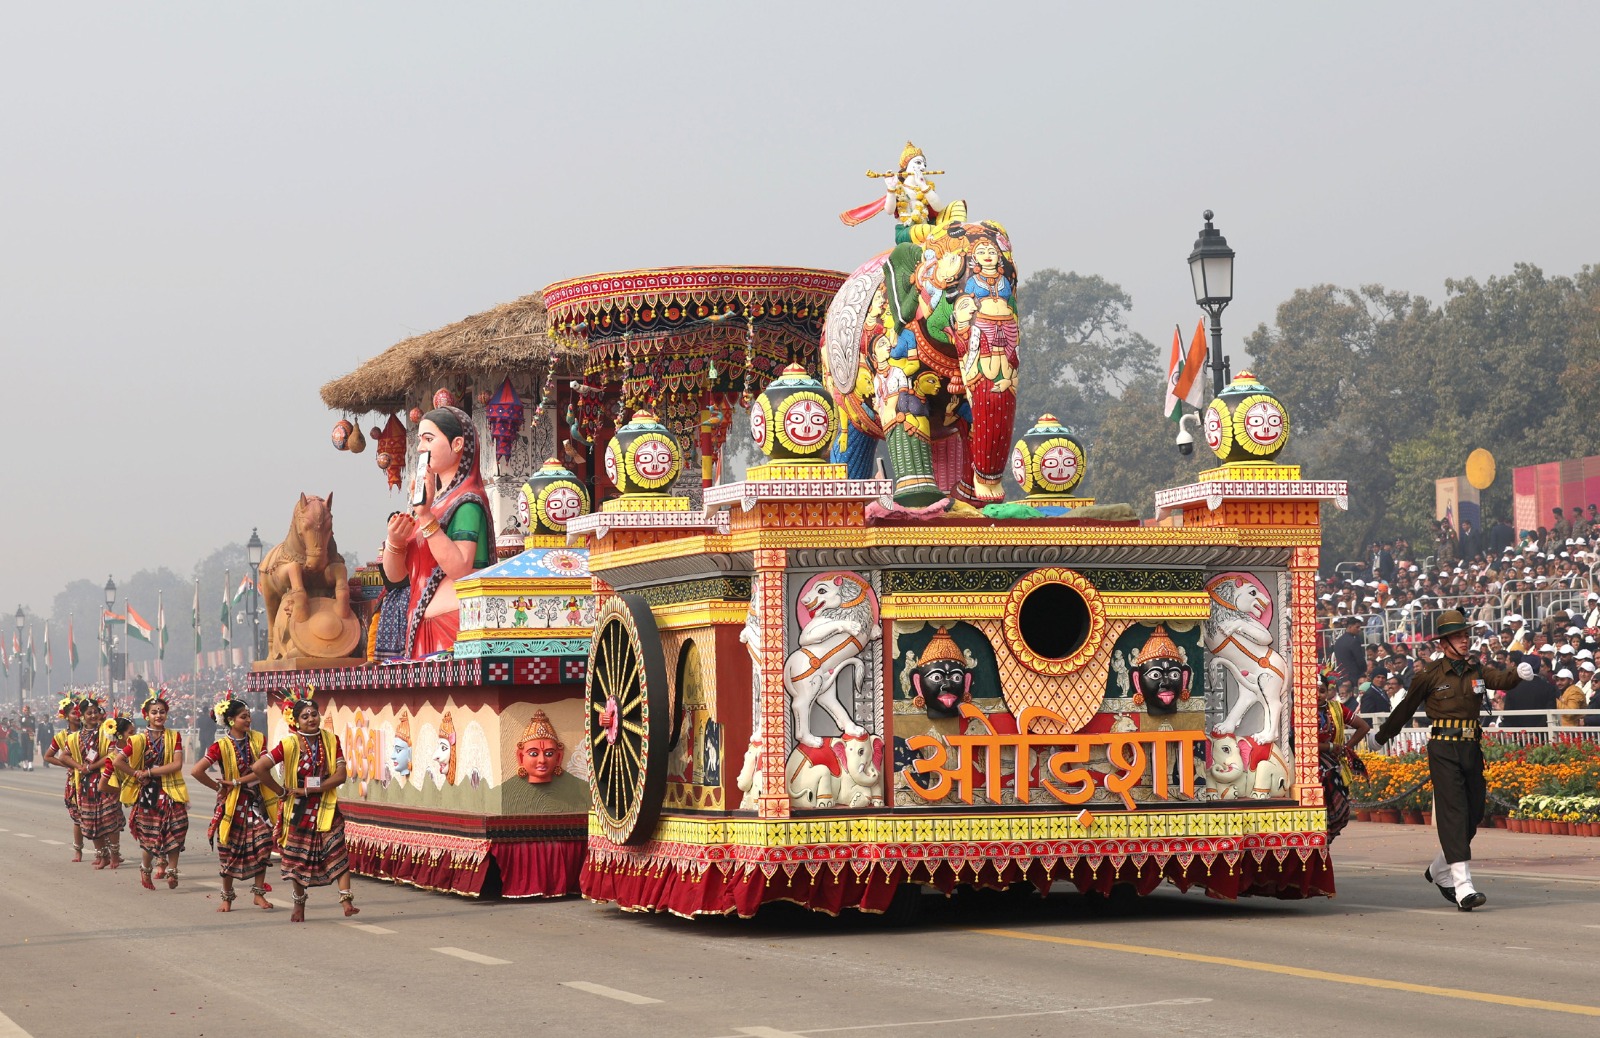 The tableau from Odisha which rolled down Kartavya Path during the Republic Day parade in New Delhi has received the first prize.